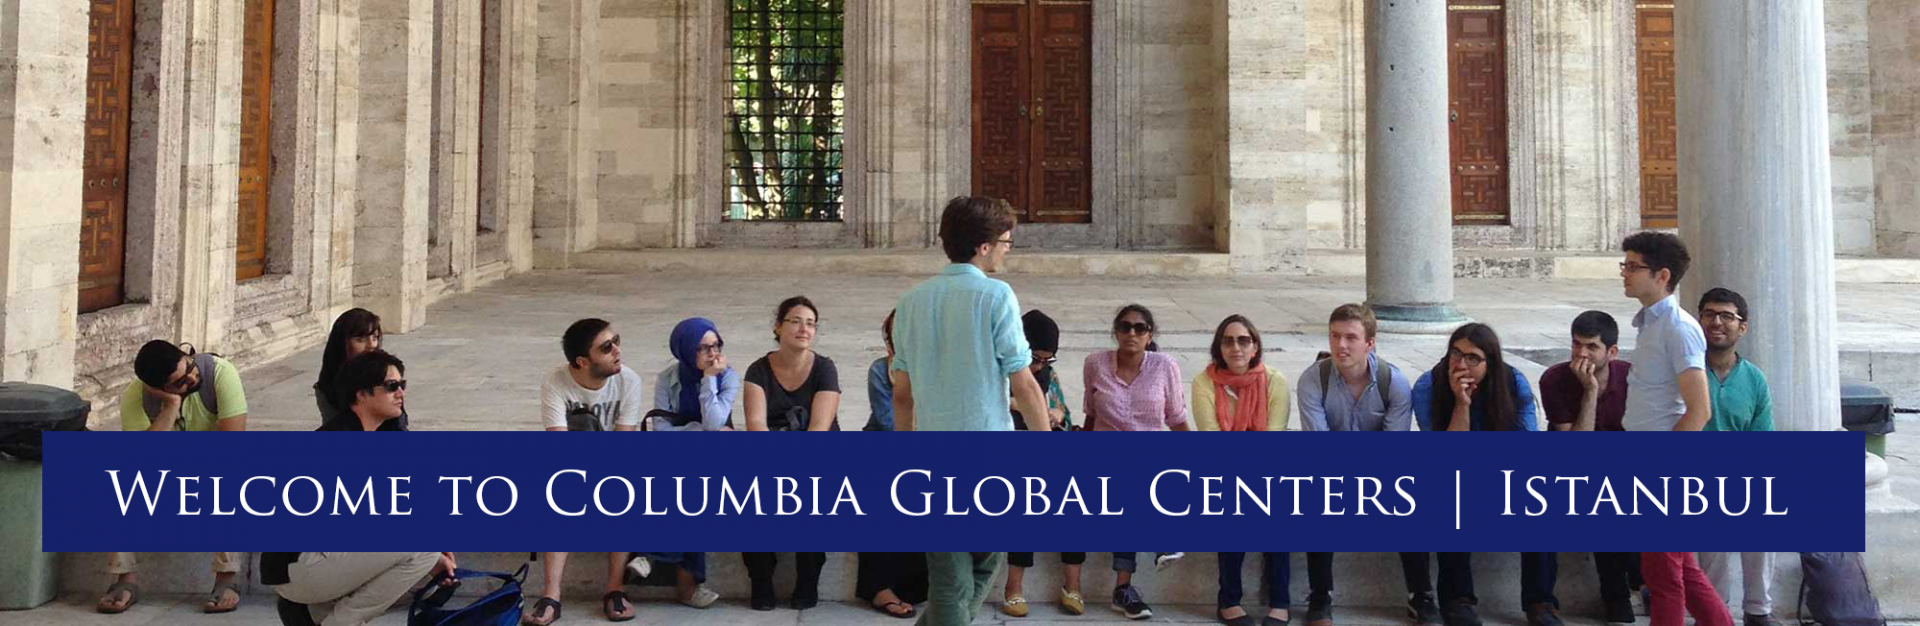 COLUMBIA GLOBAL CENTERS | ISTANBUL 